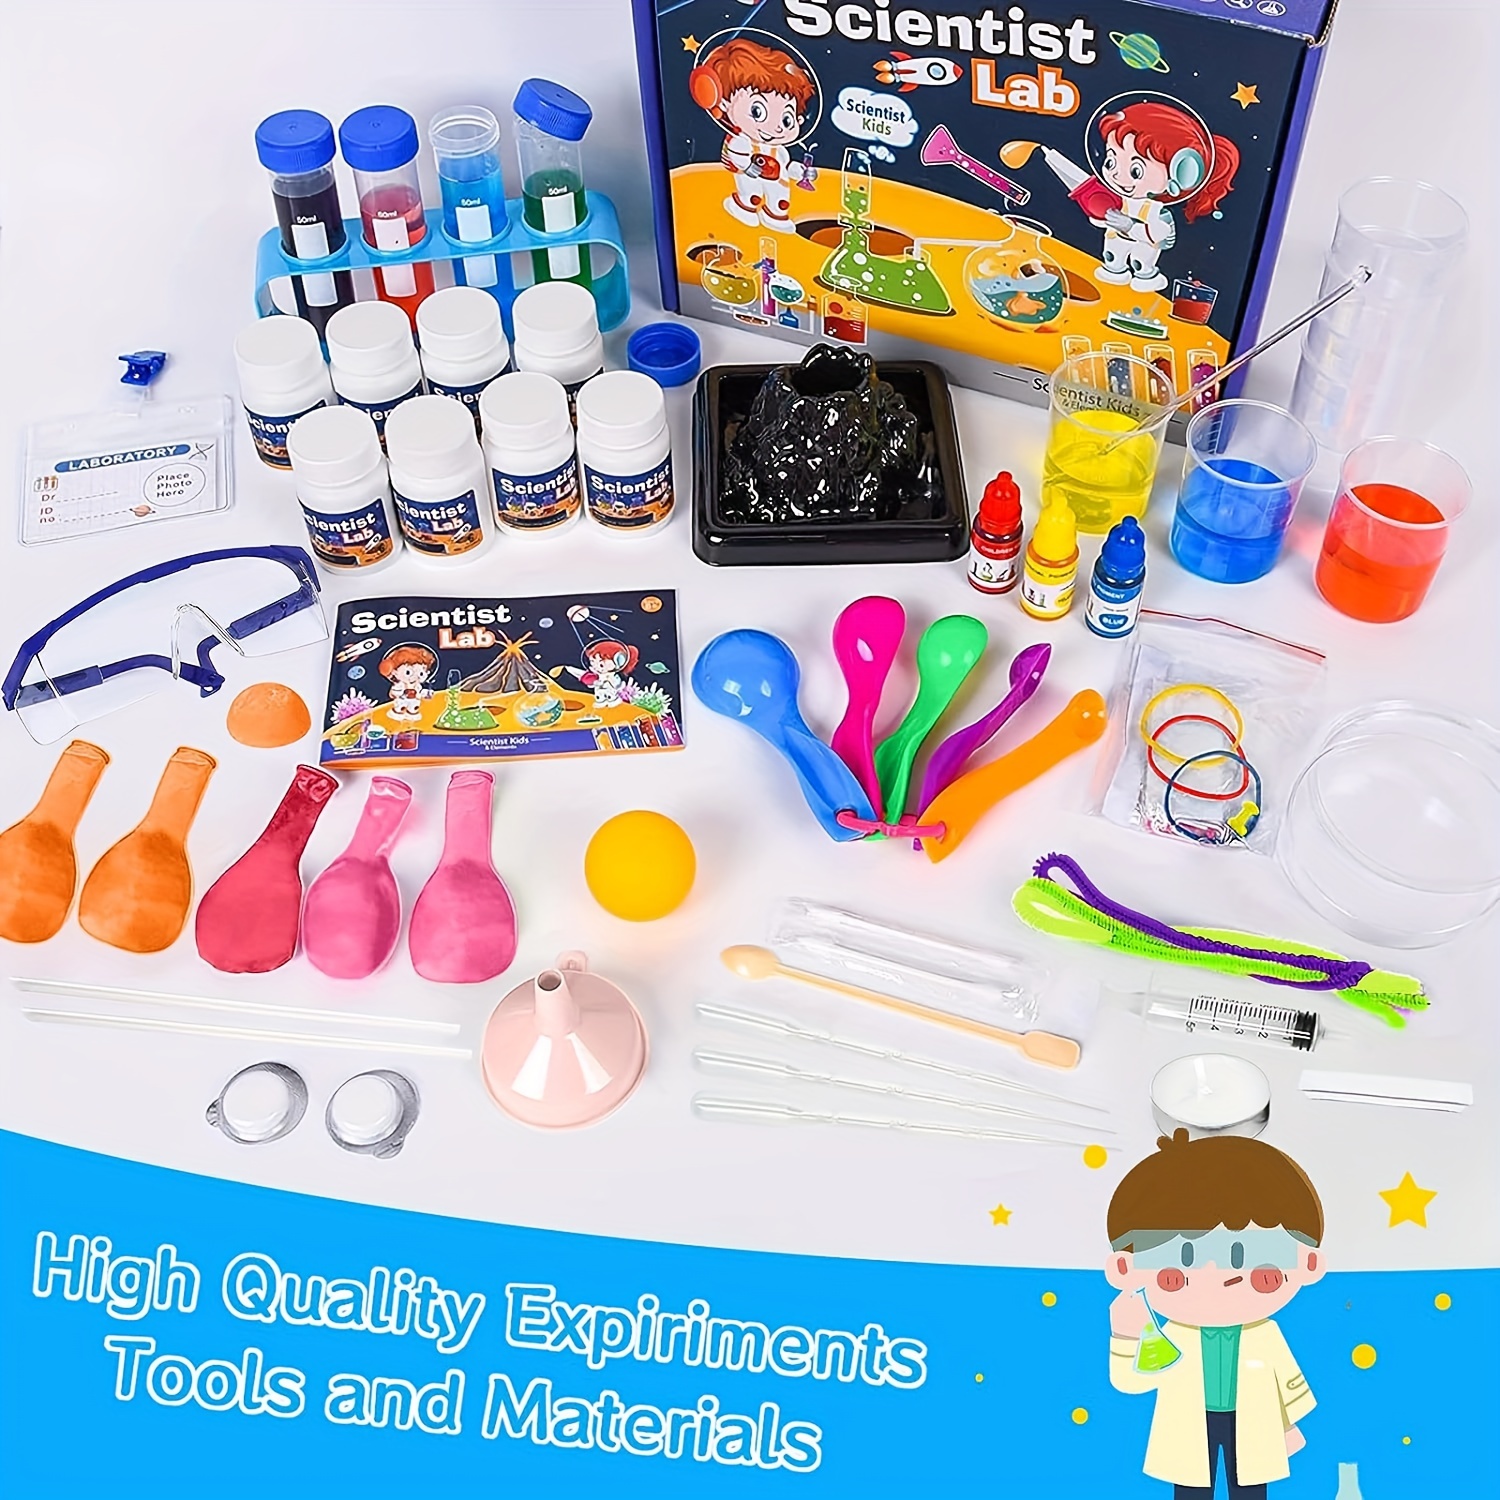 Crystal Growing Kit, STEM Projects Science Kits for Kids Age 4-6-8